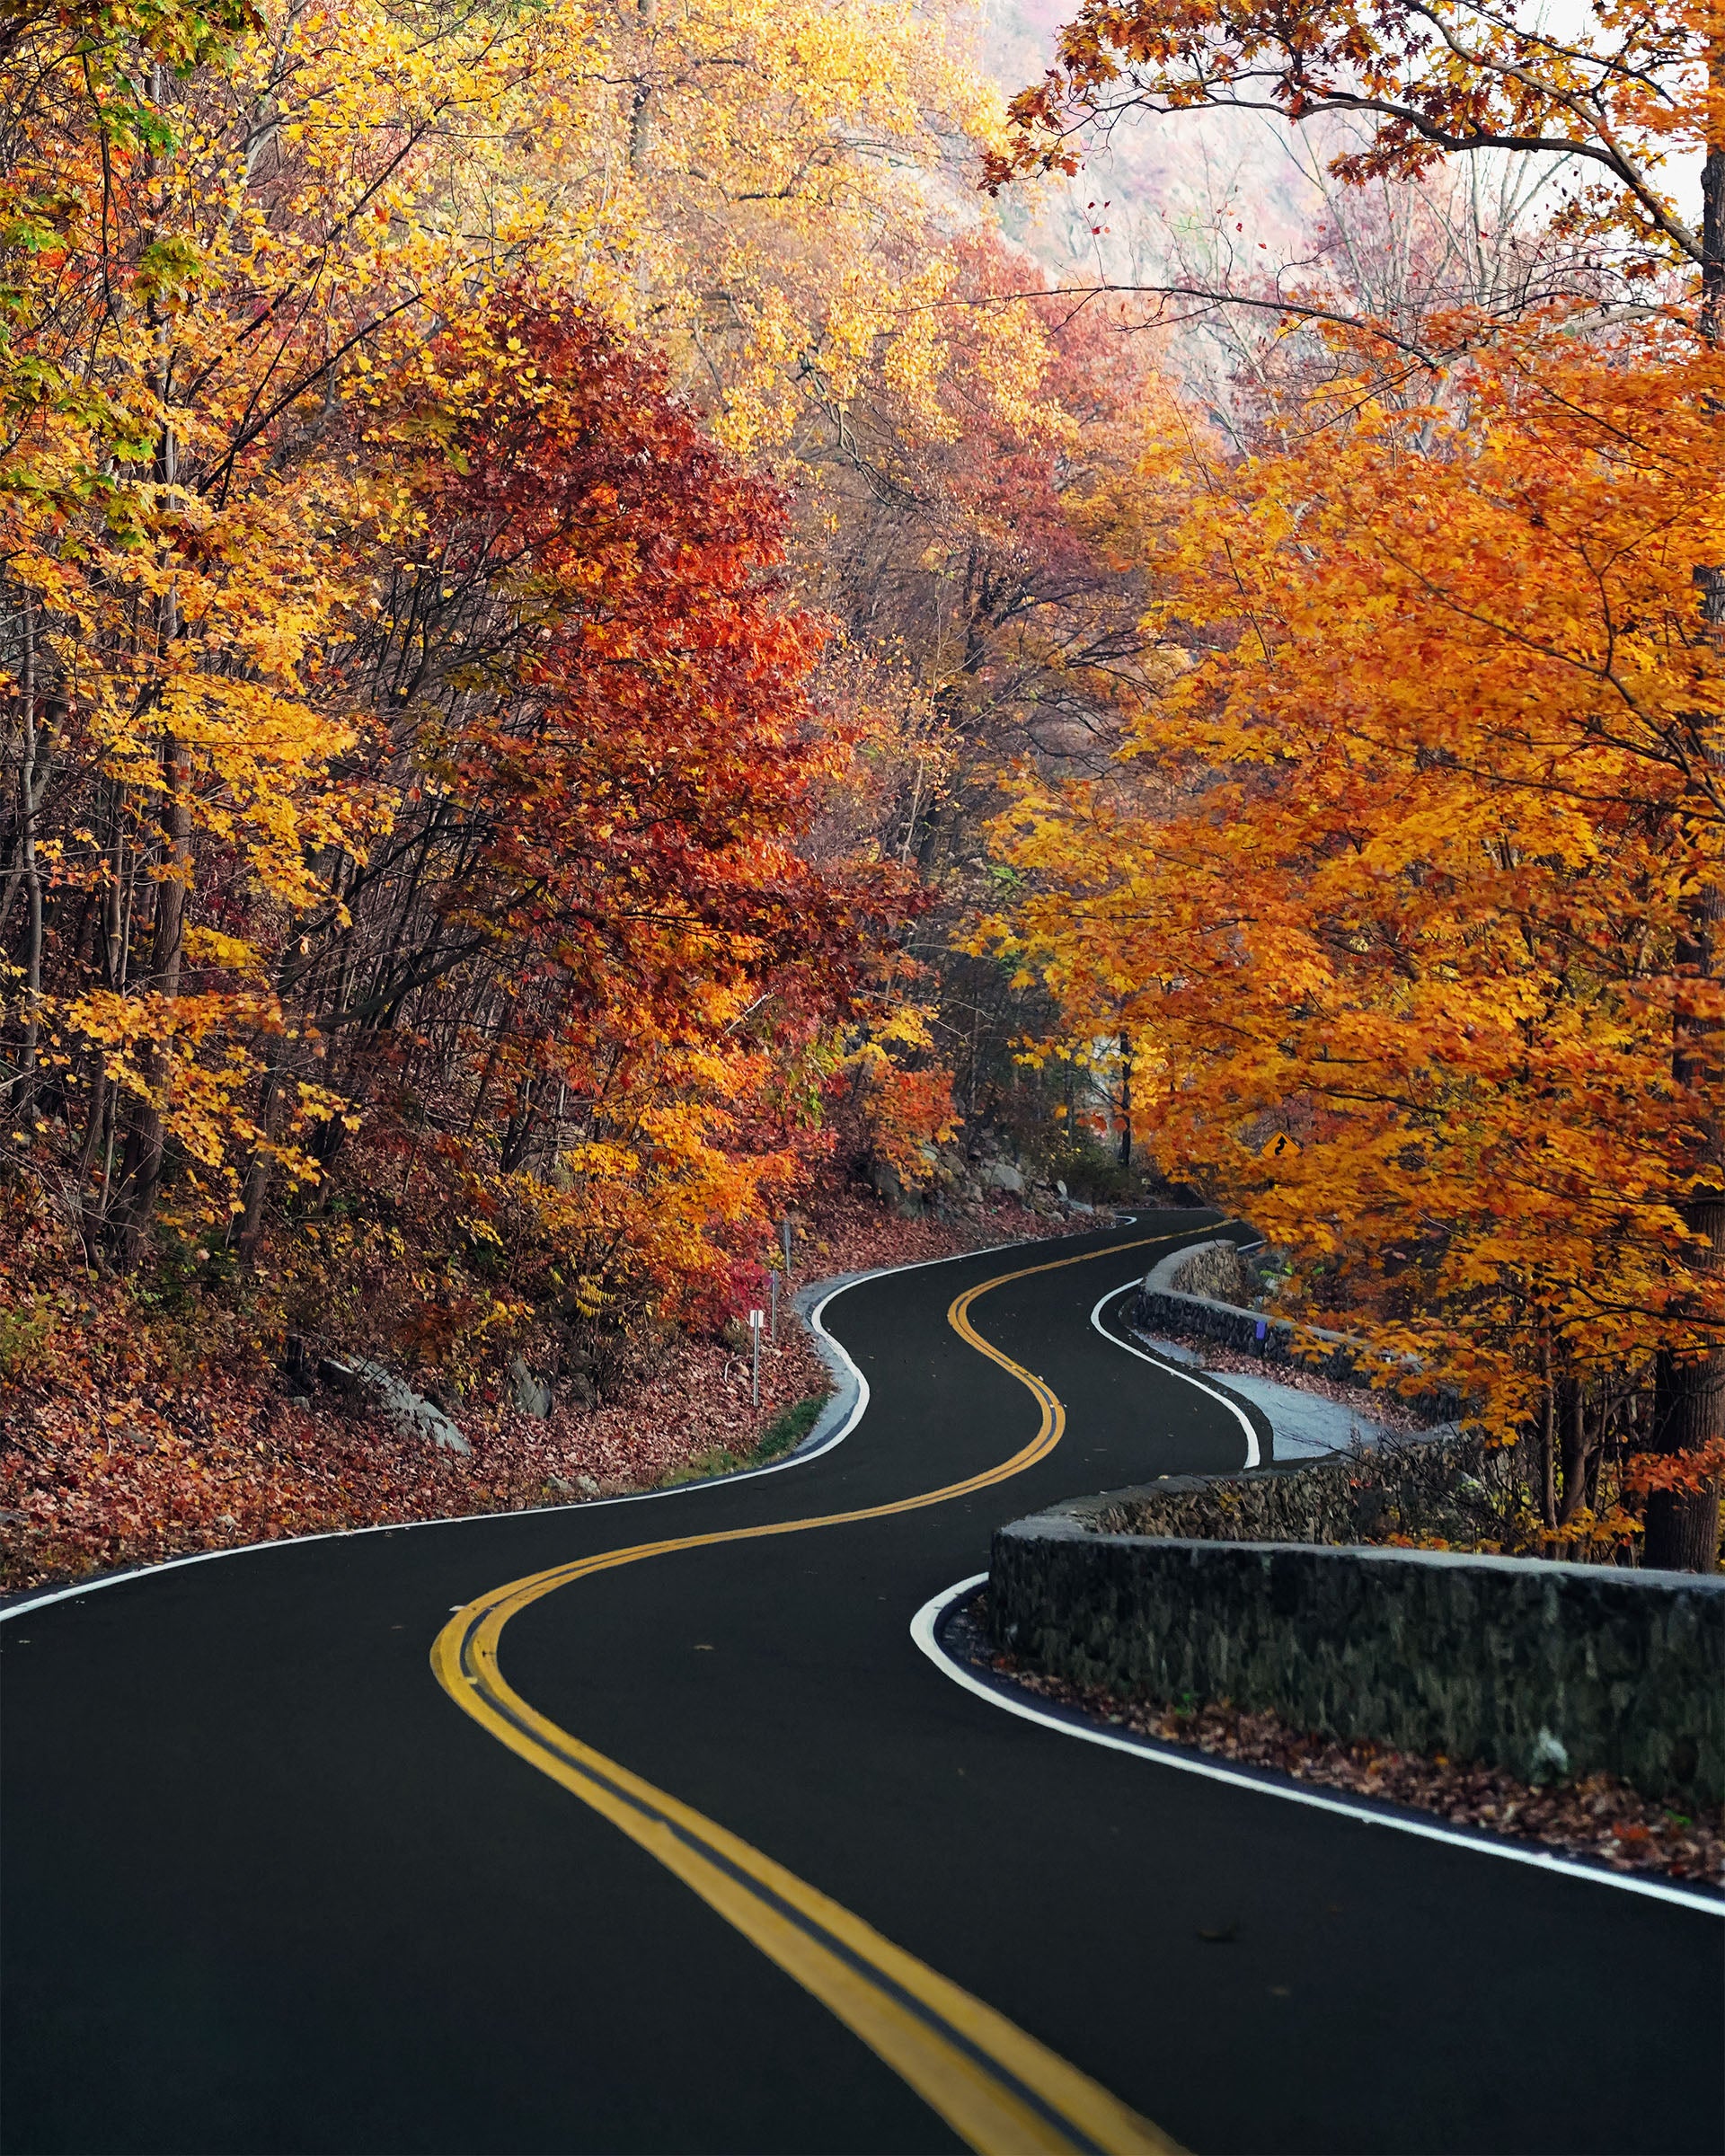 Fall foliage surrounds a winding road in the Northeast USA.